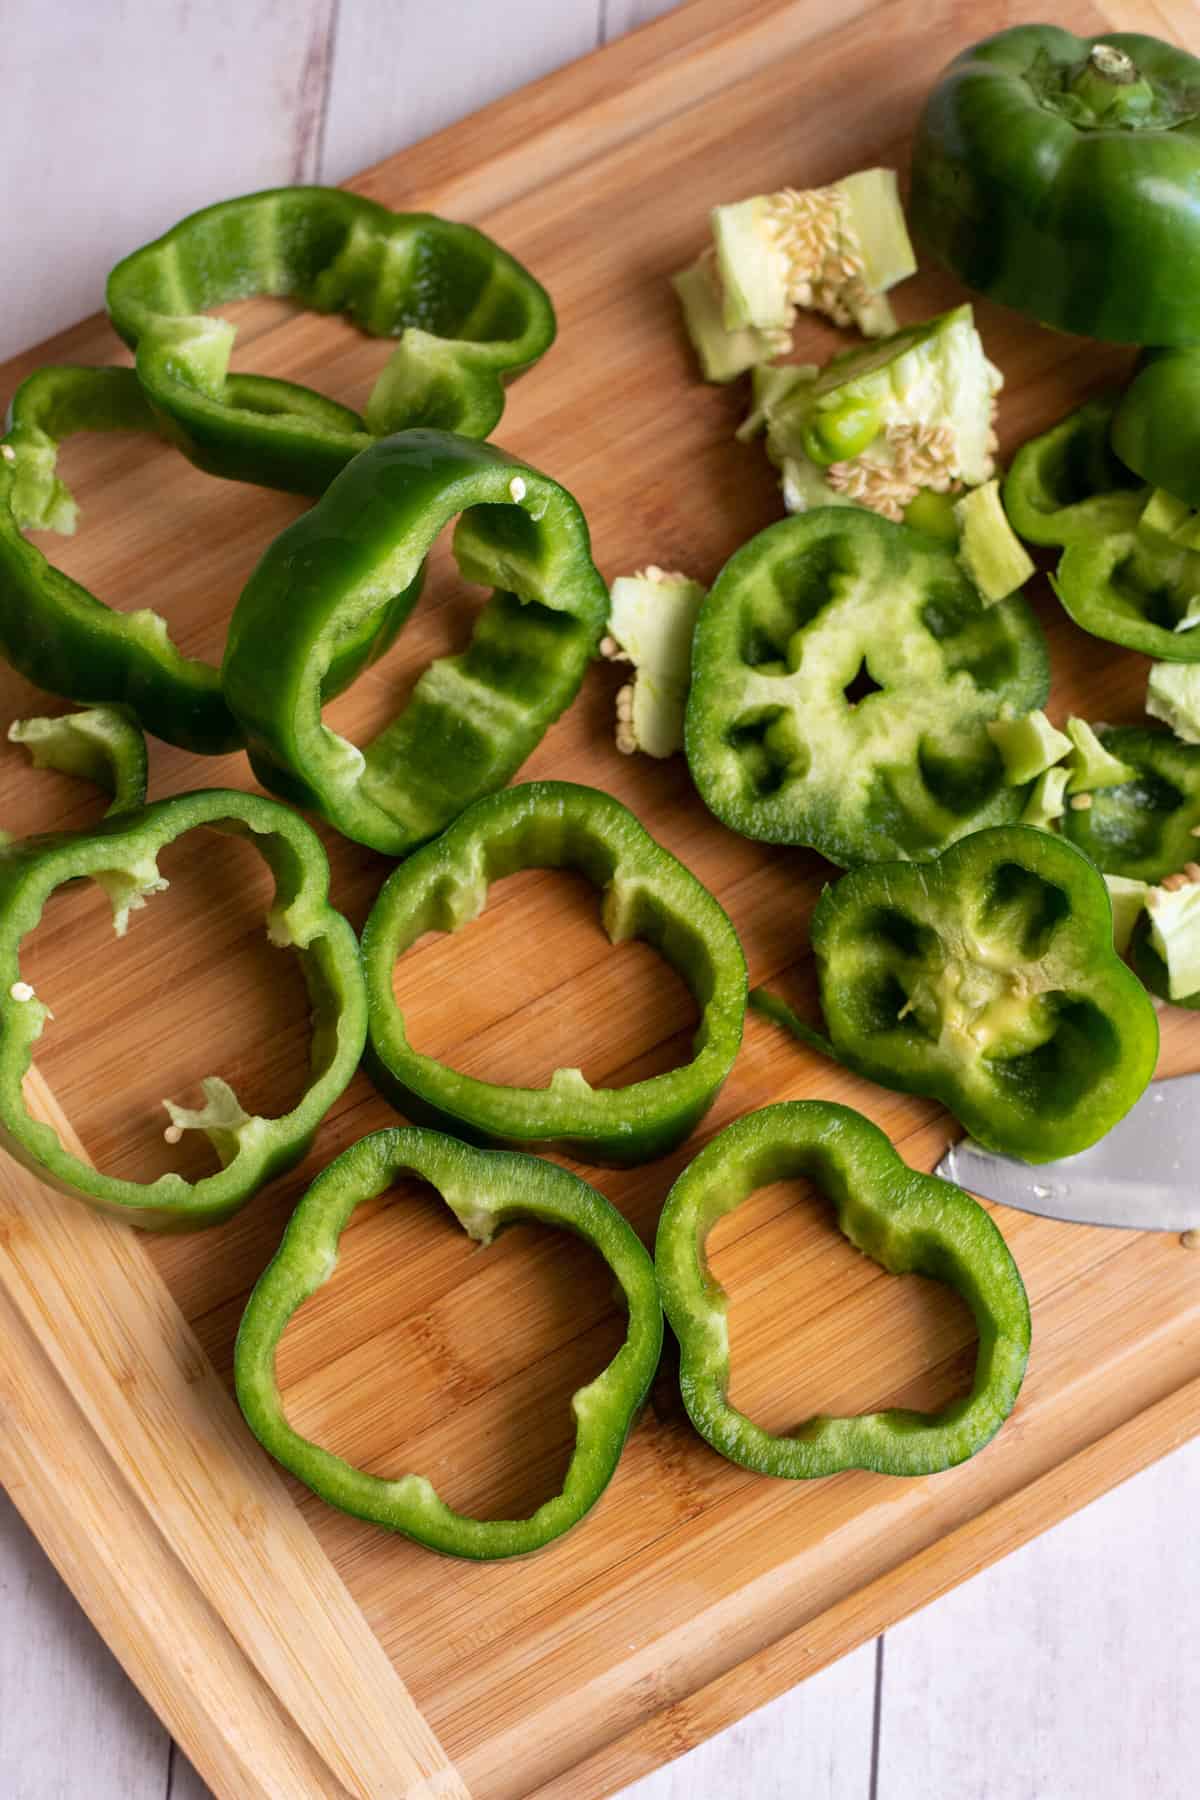 Cut tops and bottoms off green bell peppers.